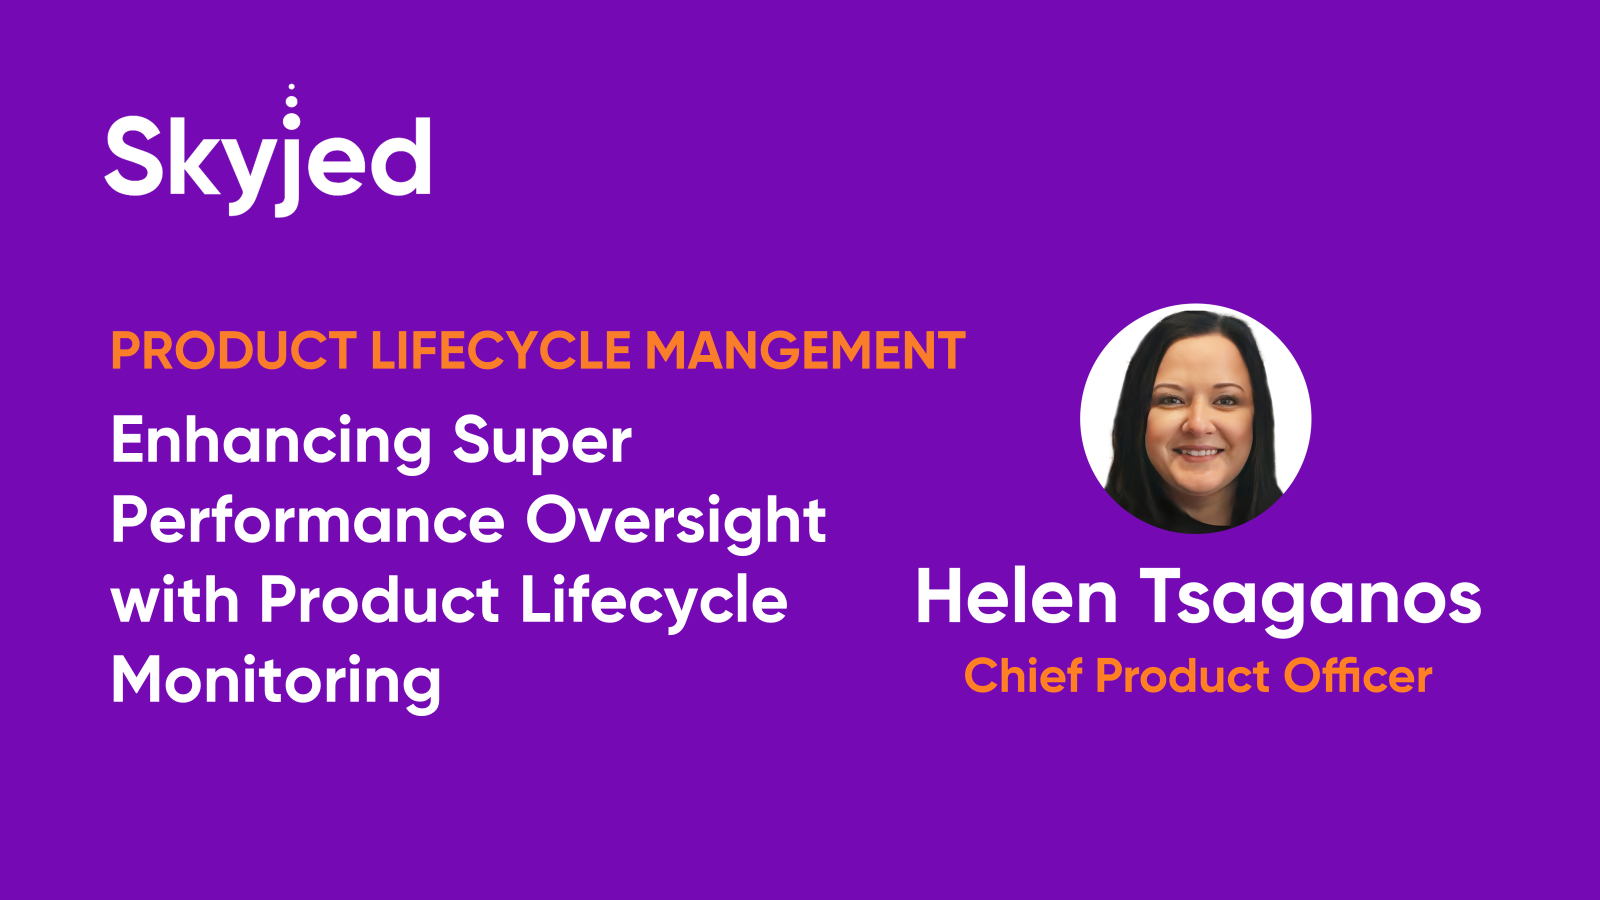 Enhancing Super Performance Oversight with Product Lifecycle Monitoring